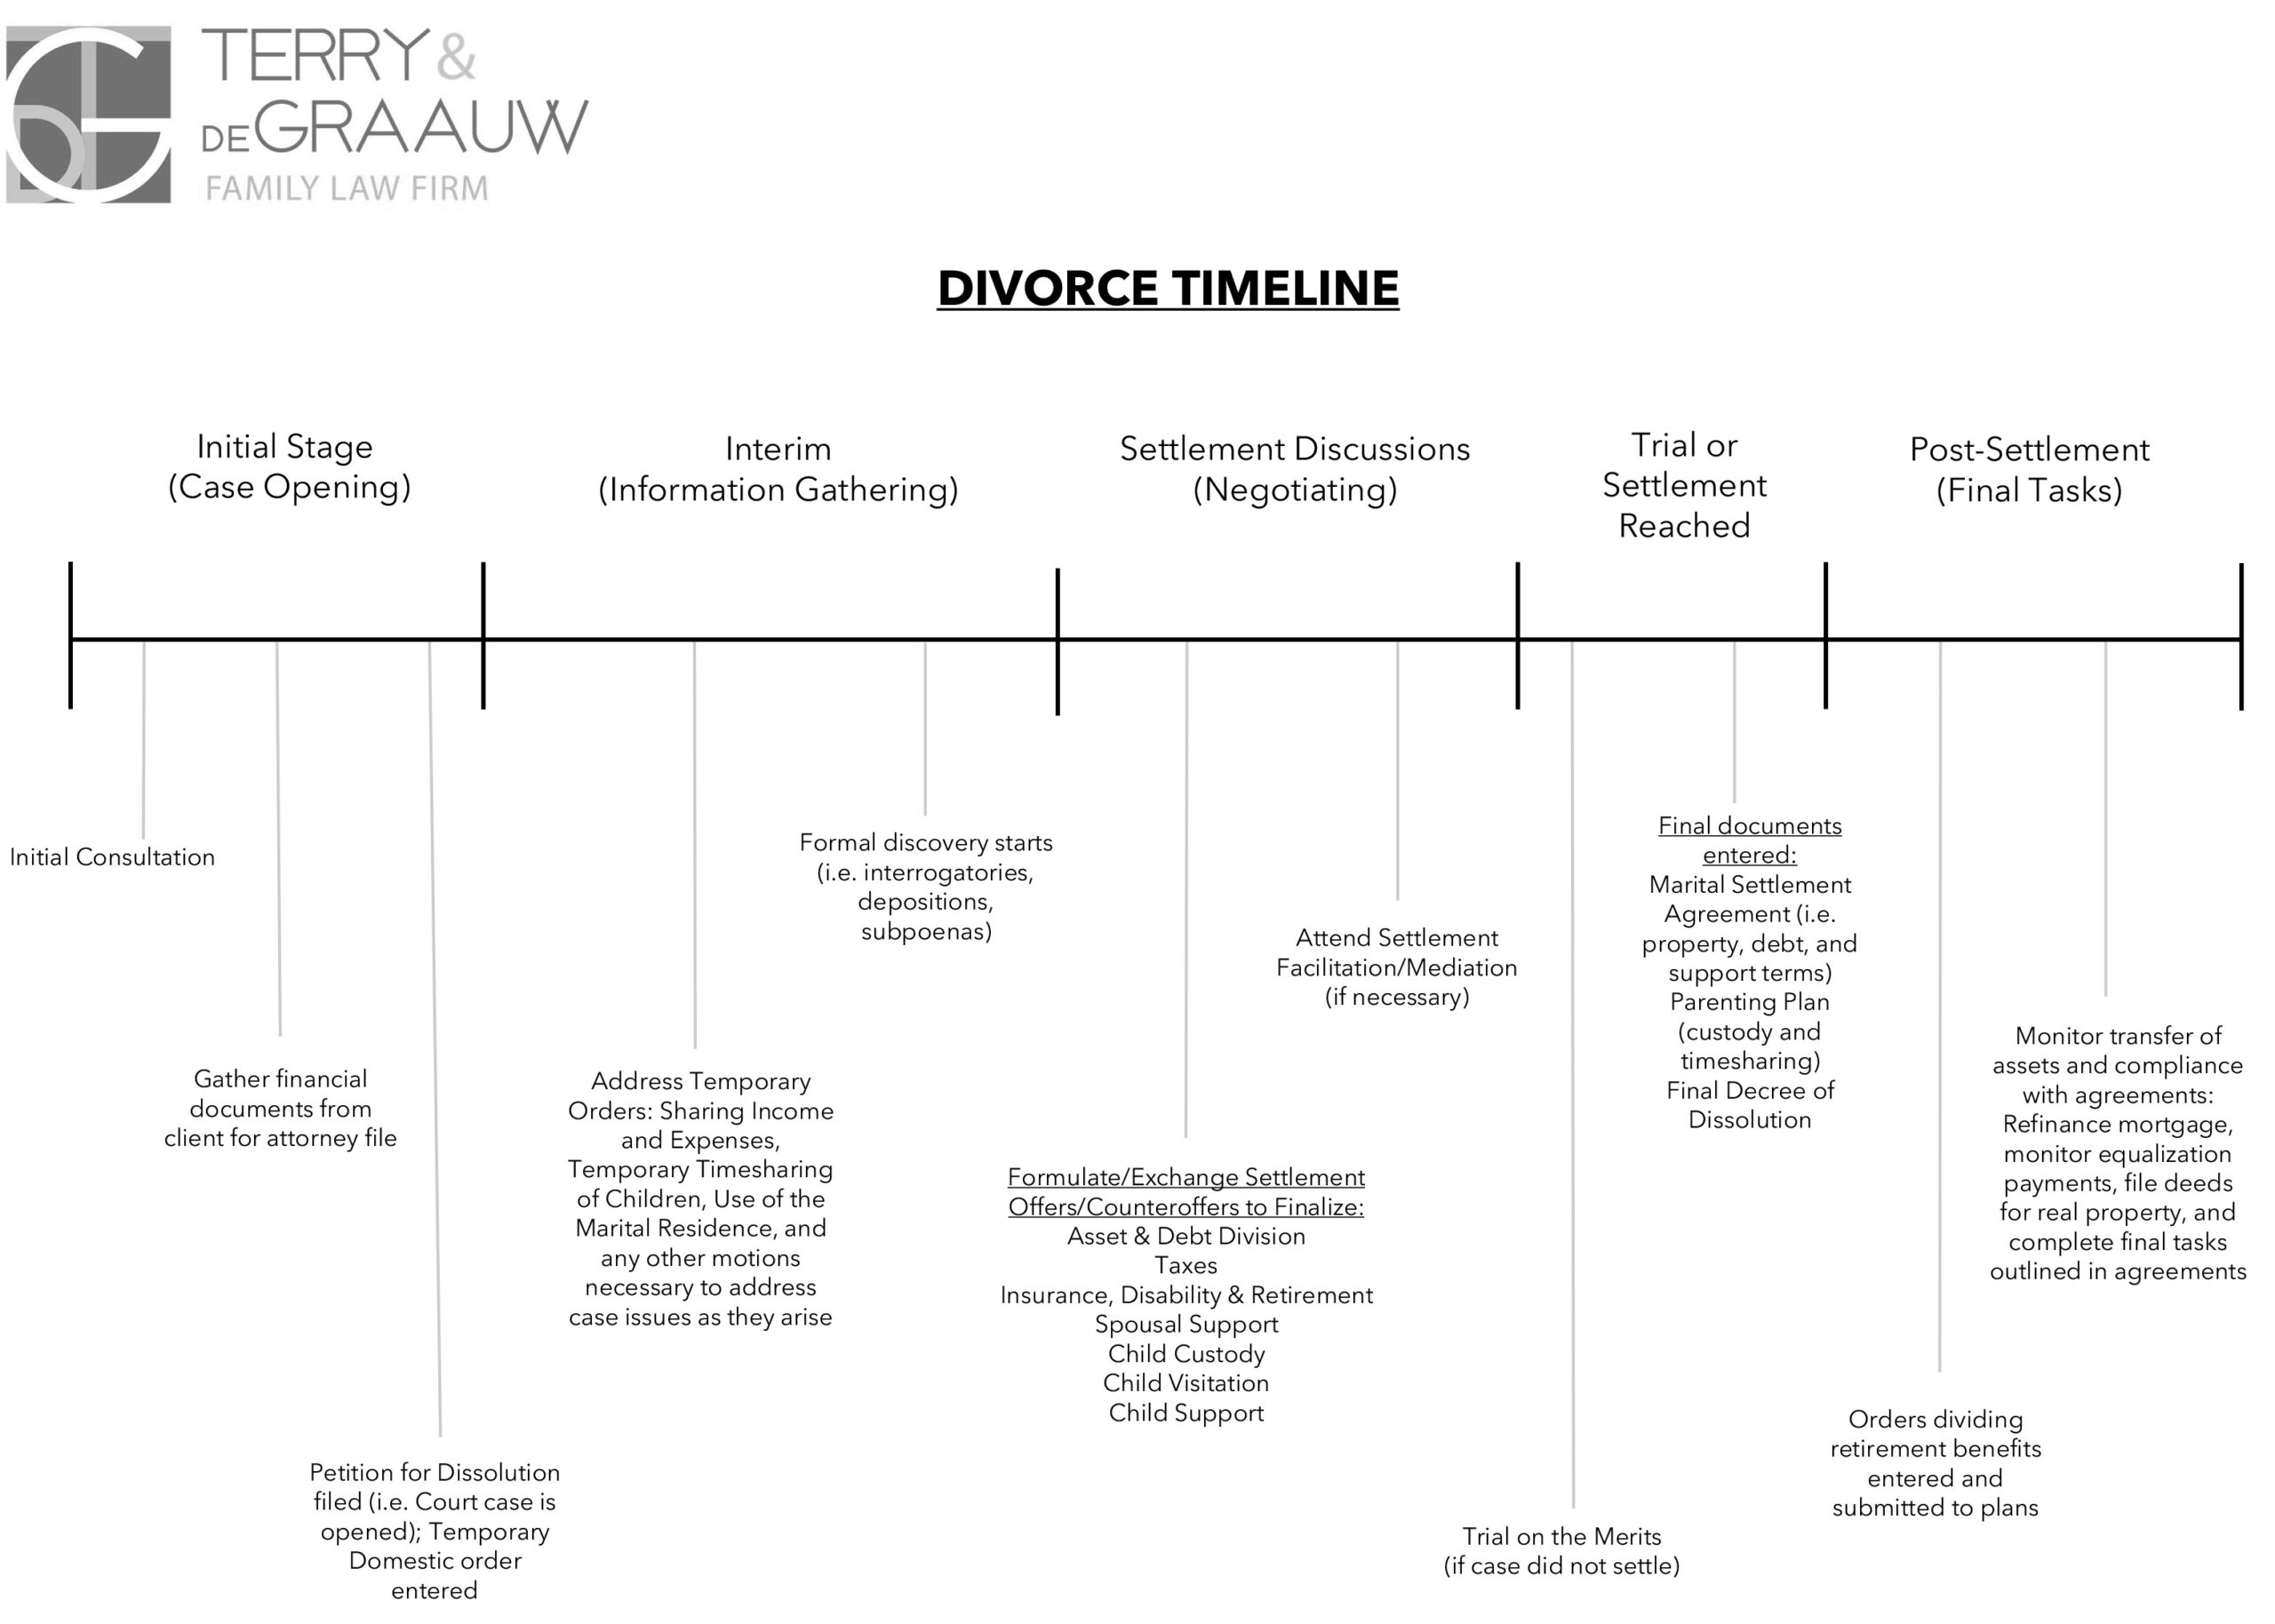 Stages of the Divorce Process, Stages of the Divorce Process